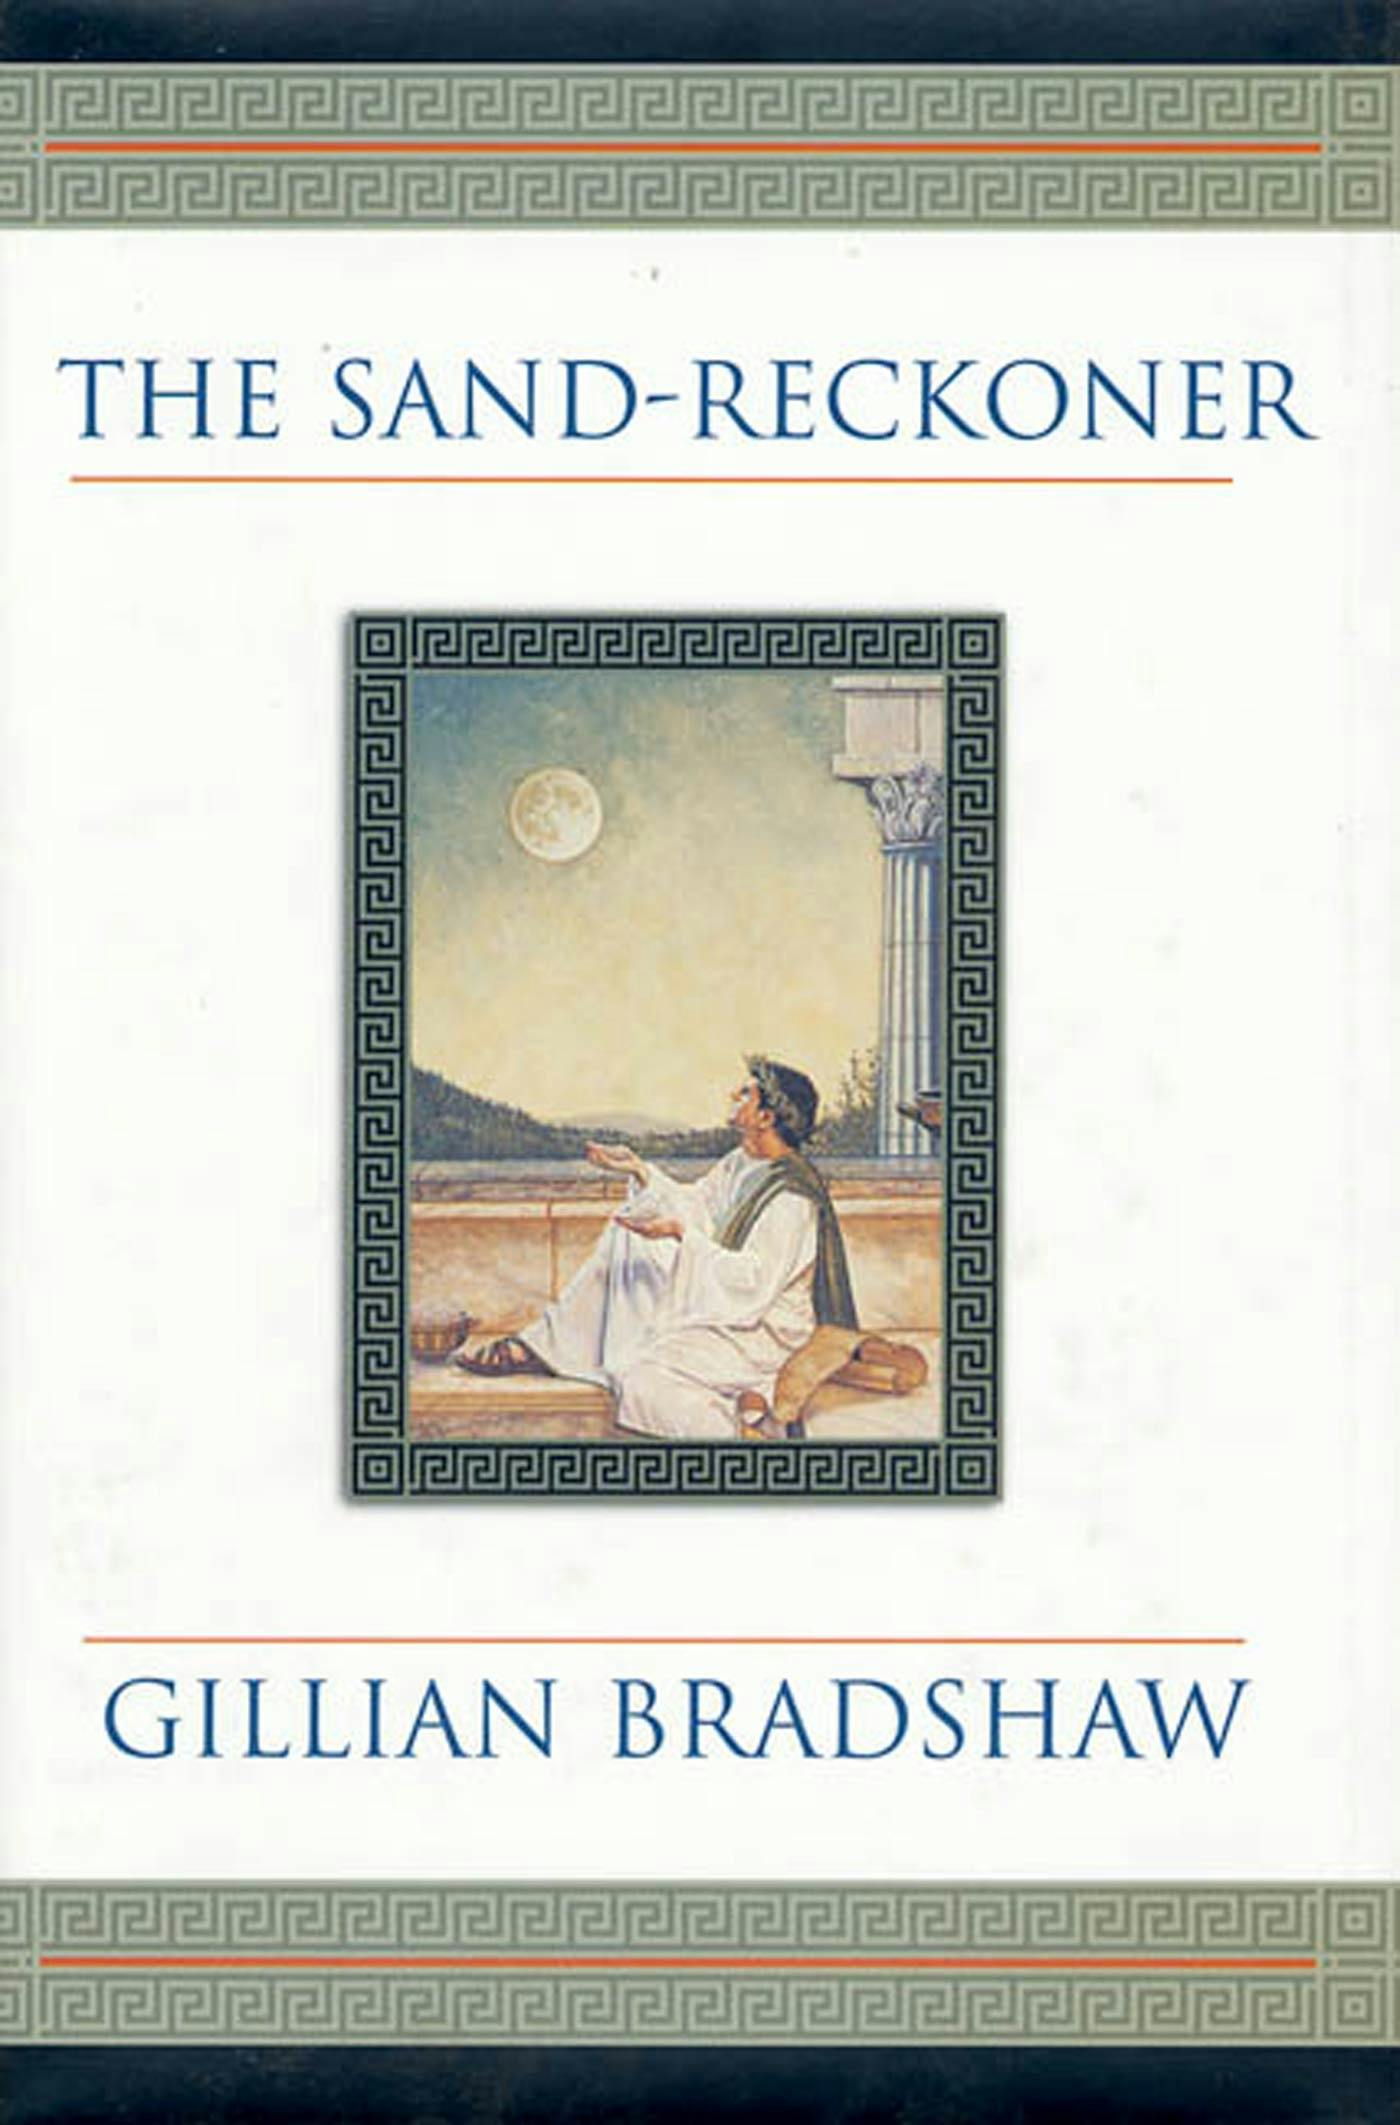 Cover for the book titled as: The Sand-Reckoner